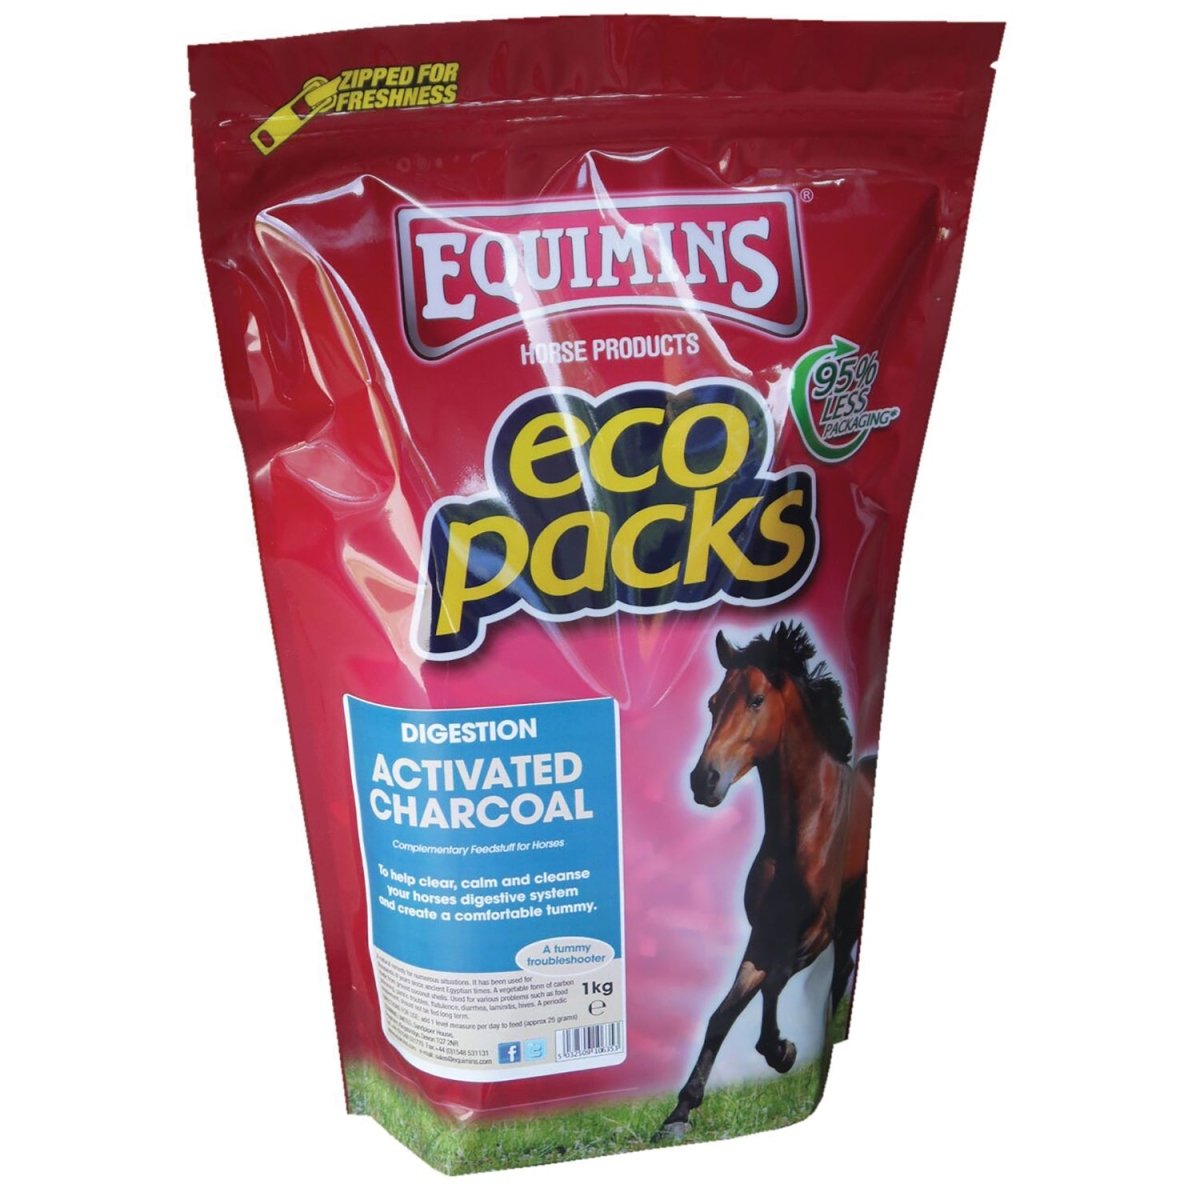 Equimins Activated Charcoal - 1Kg -